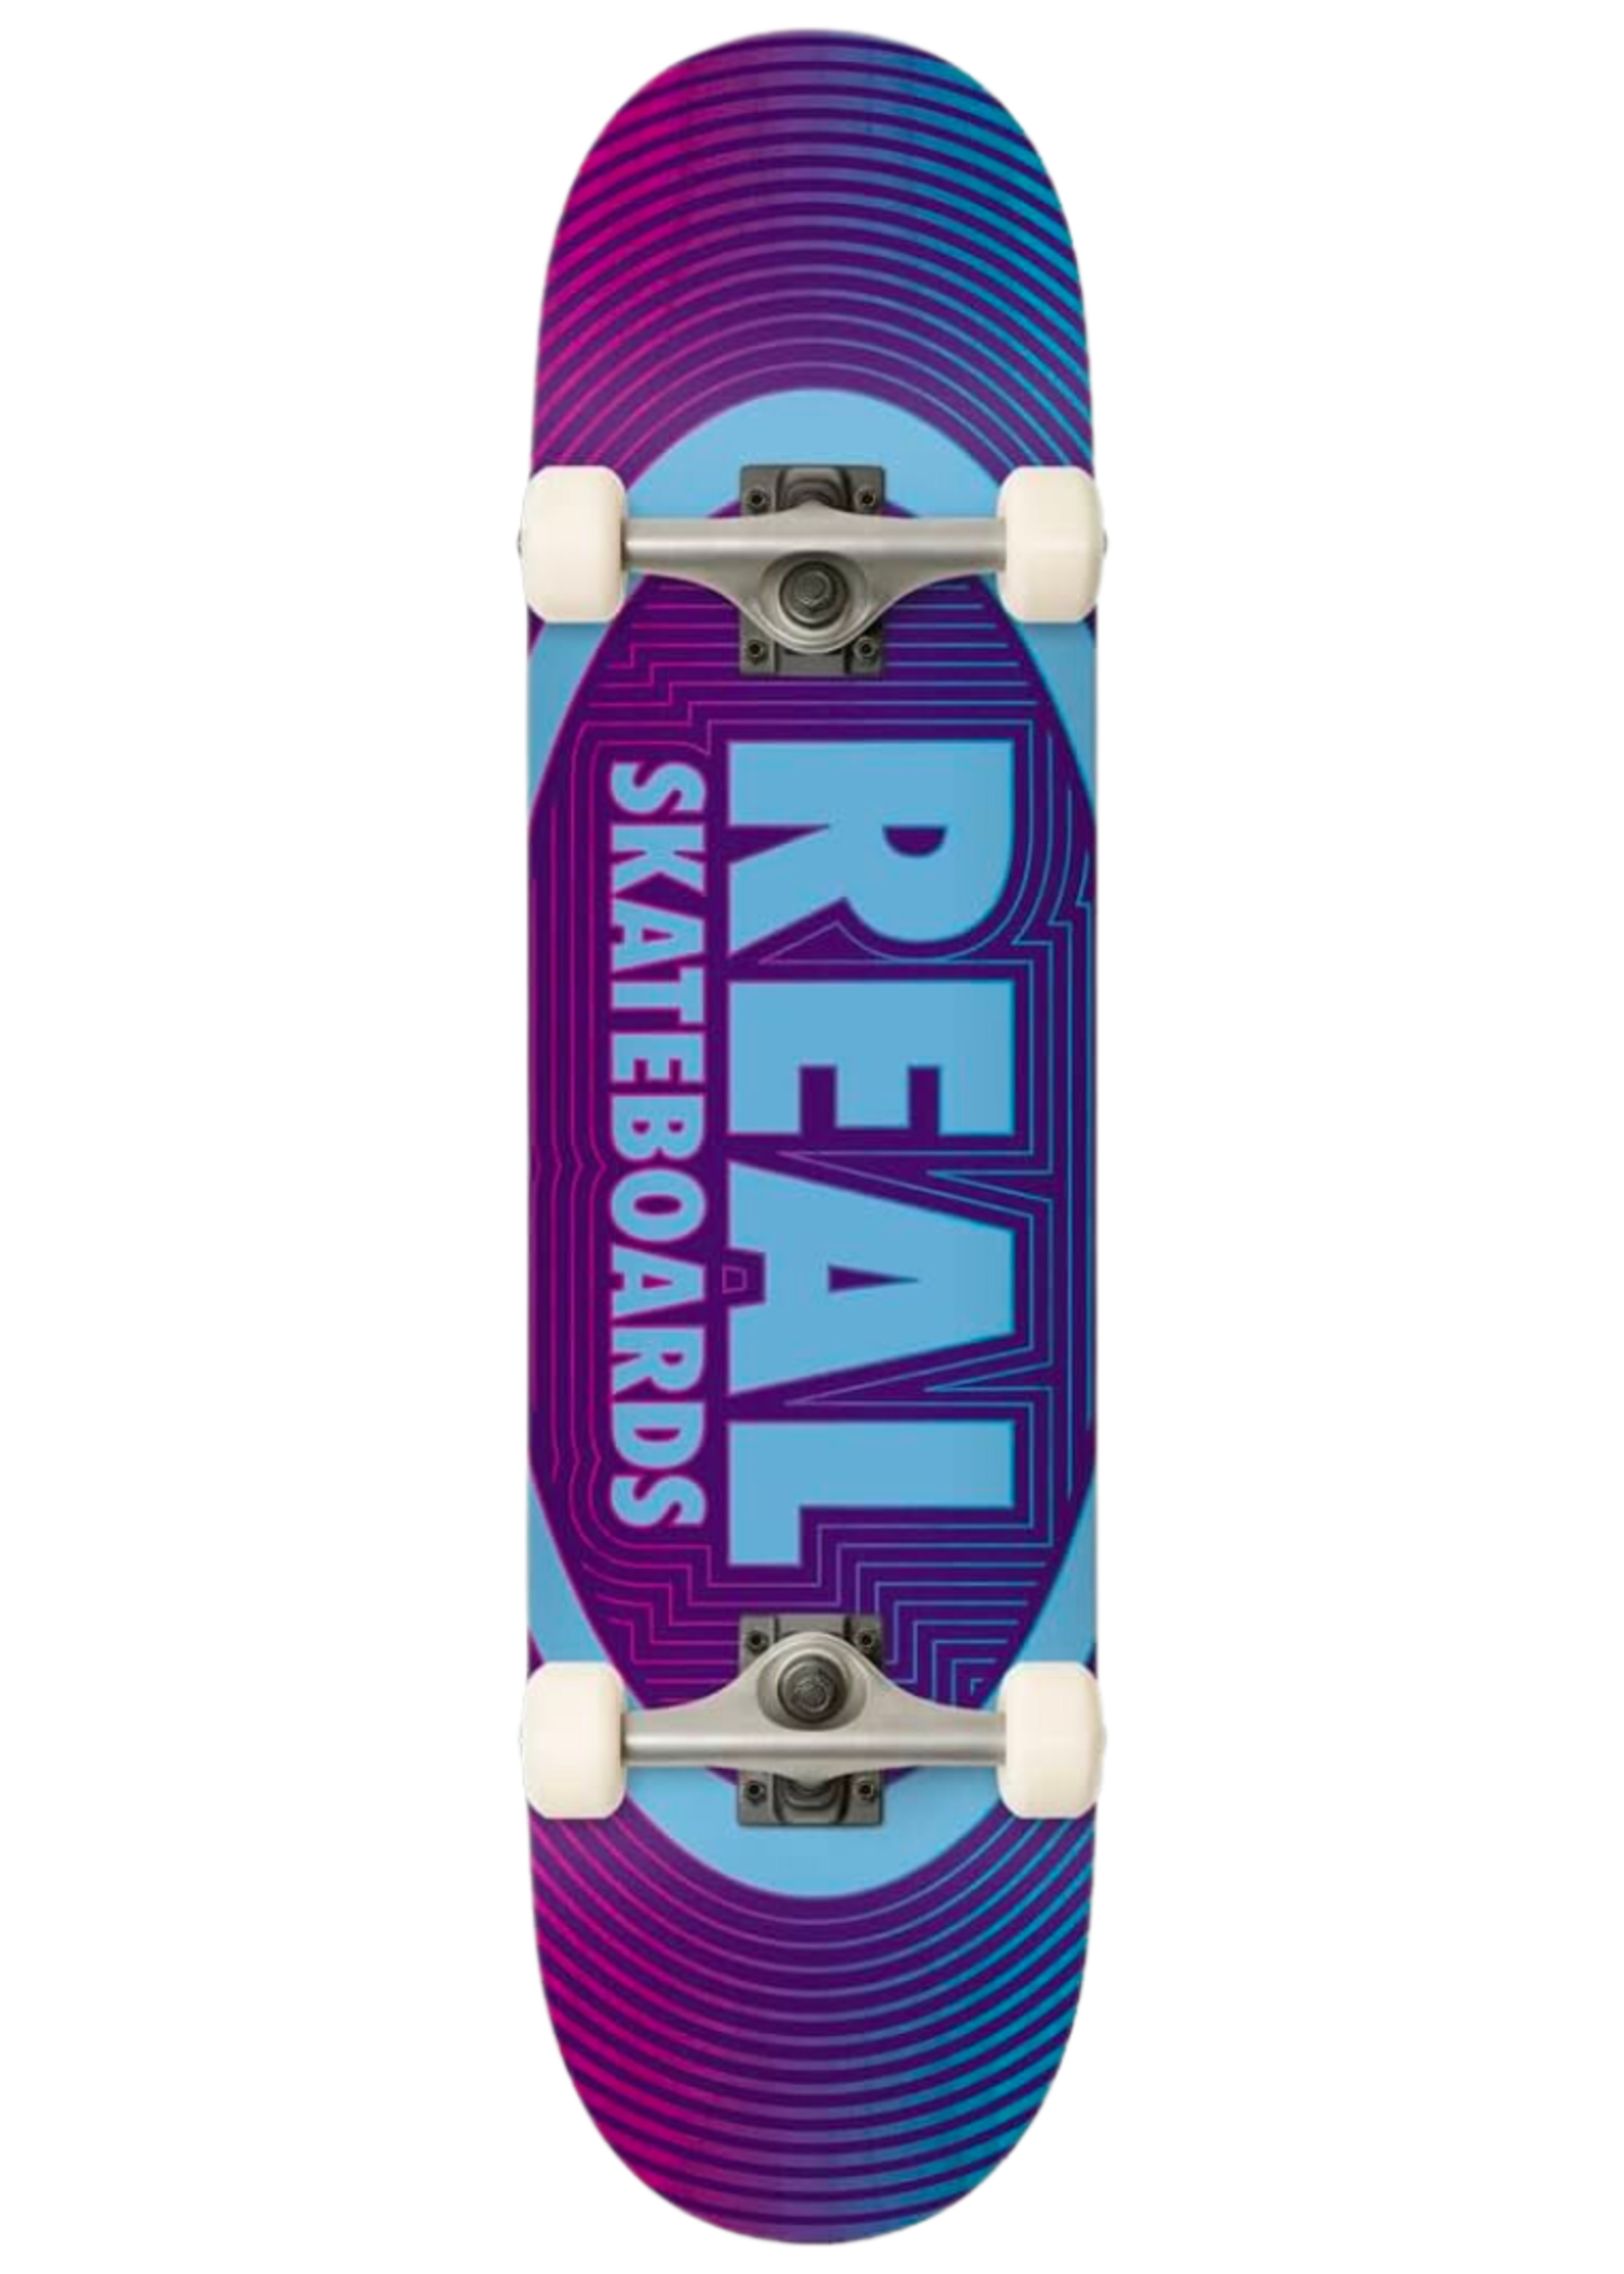 REAL CONCENTRIC OVAL 8" COMPLETE SKATEBOARD